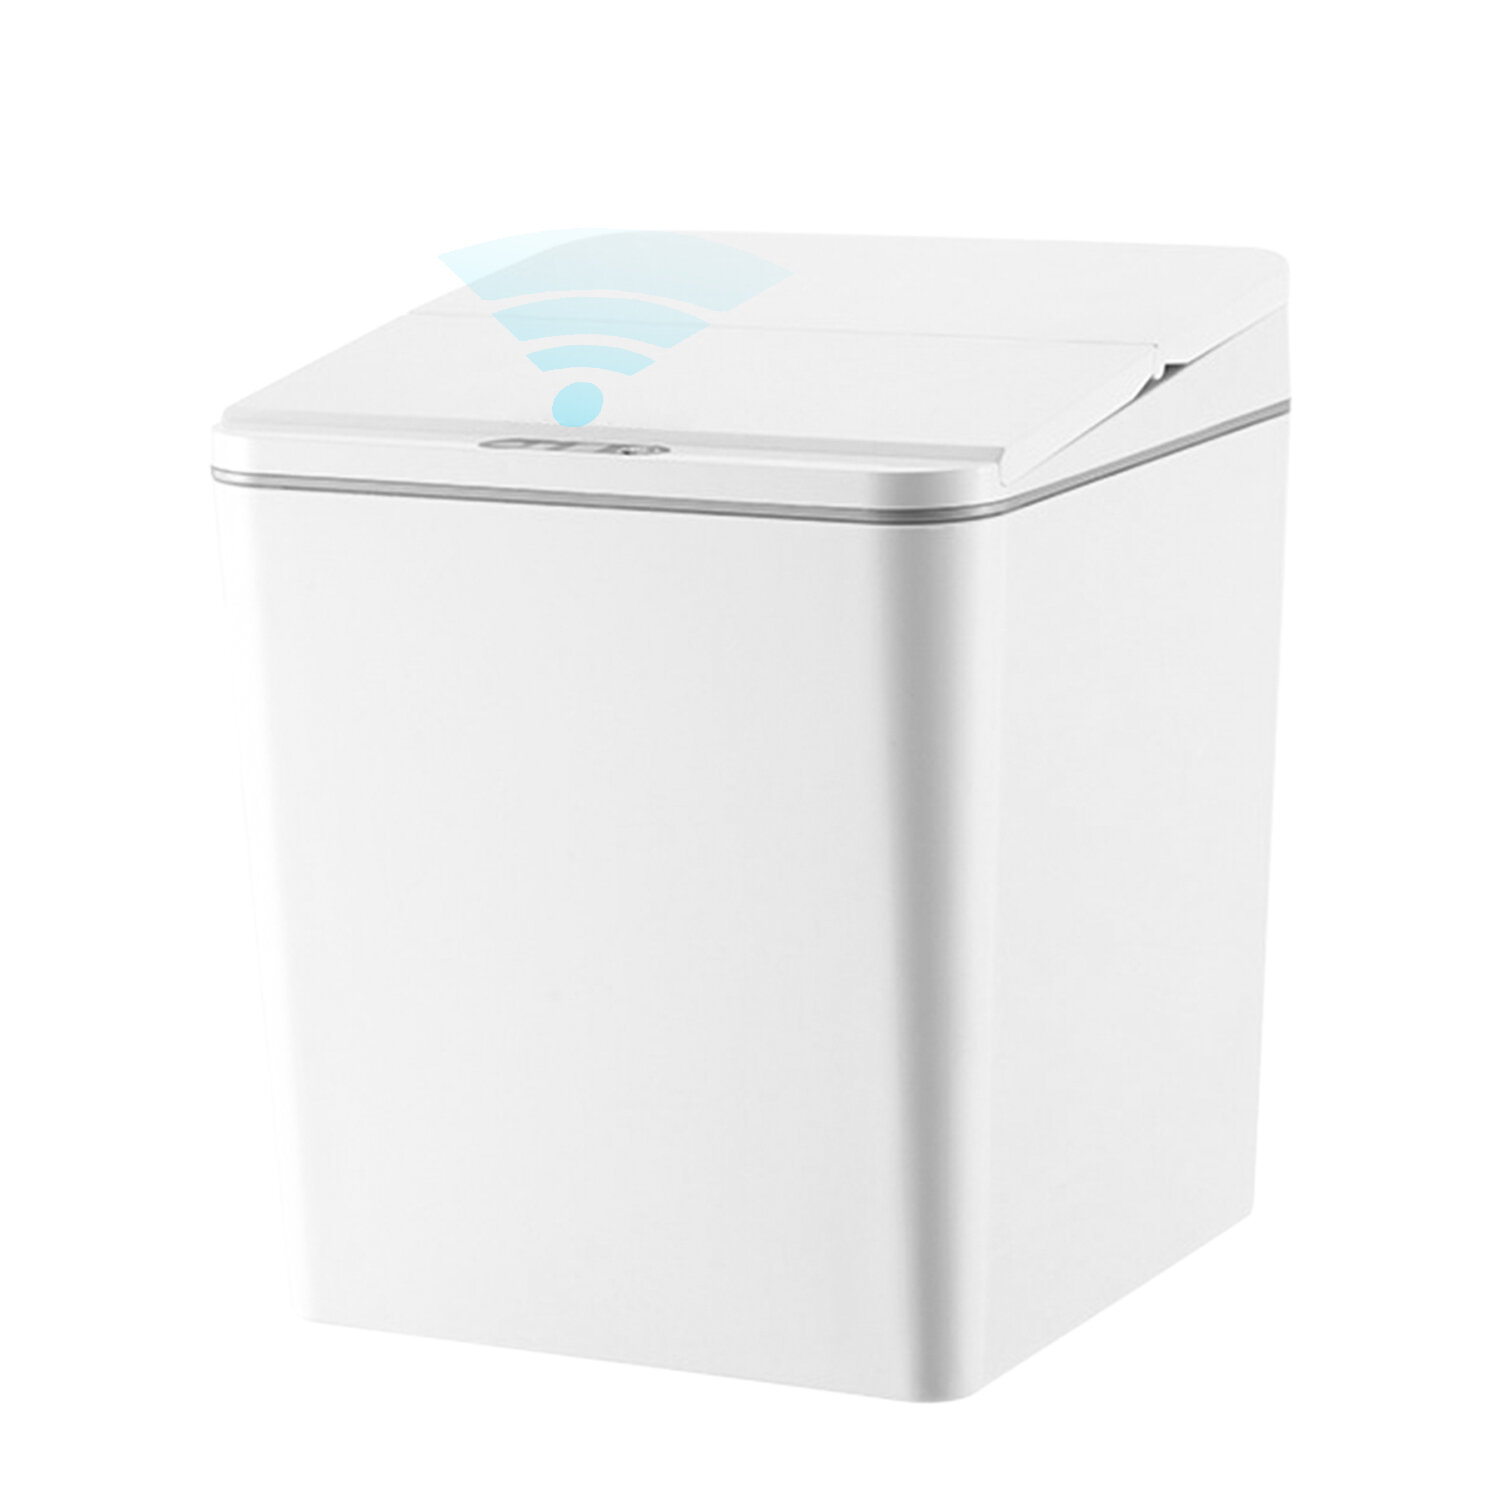 

Bakeey 6L Touch-free Trash Cans Smart Induction Trash Bin Infrared Motion Sensor Automatic Garbage Can Waste Bins